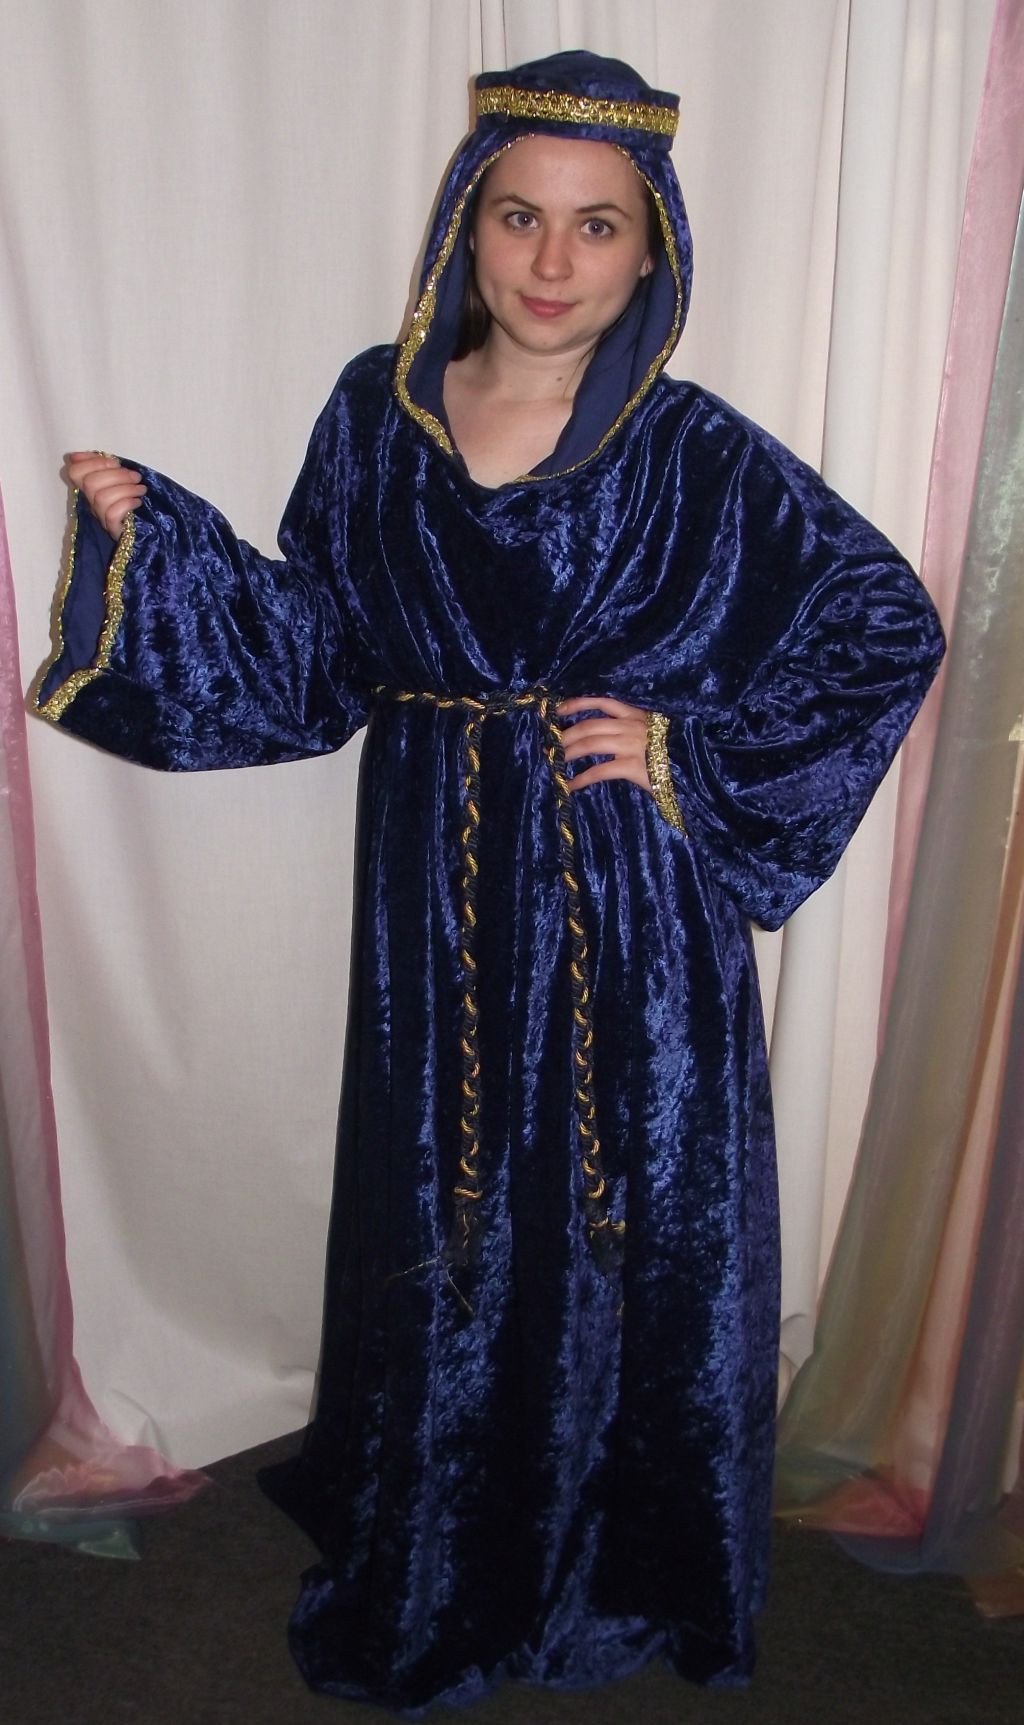 PURPLE MEDIEVAL LADY DRESS WITH HOOD (HIRE ONLY)